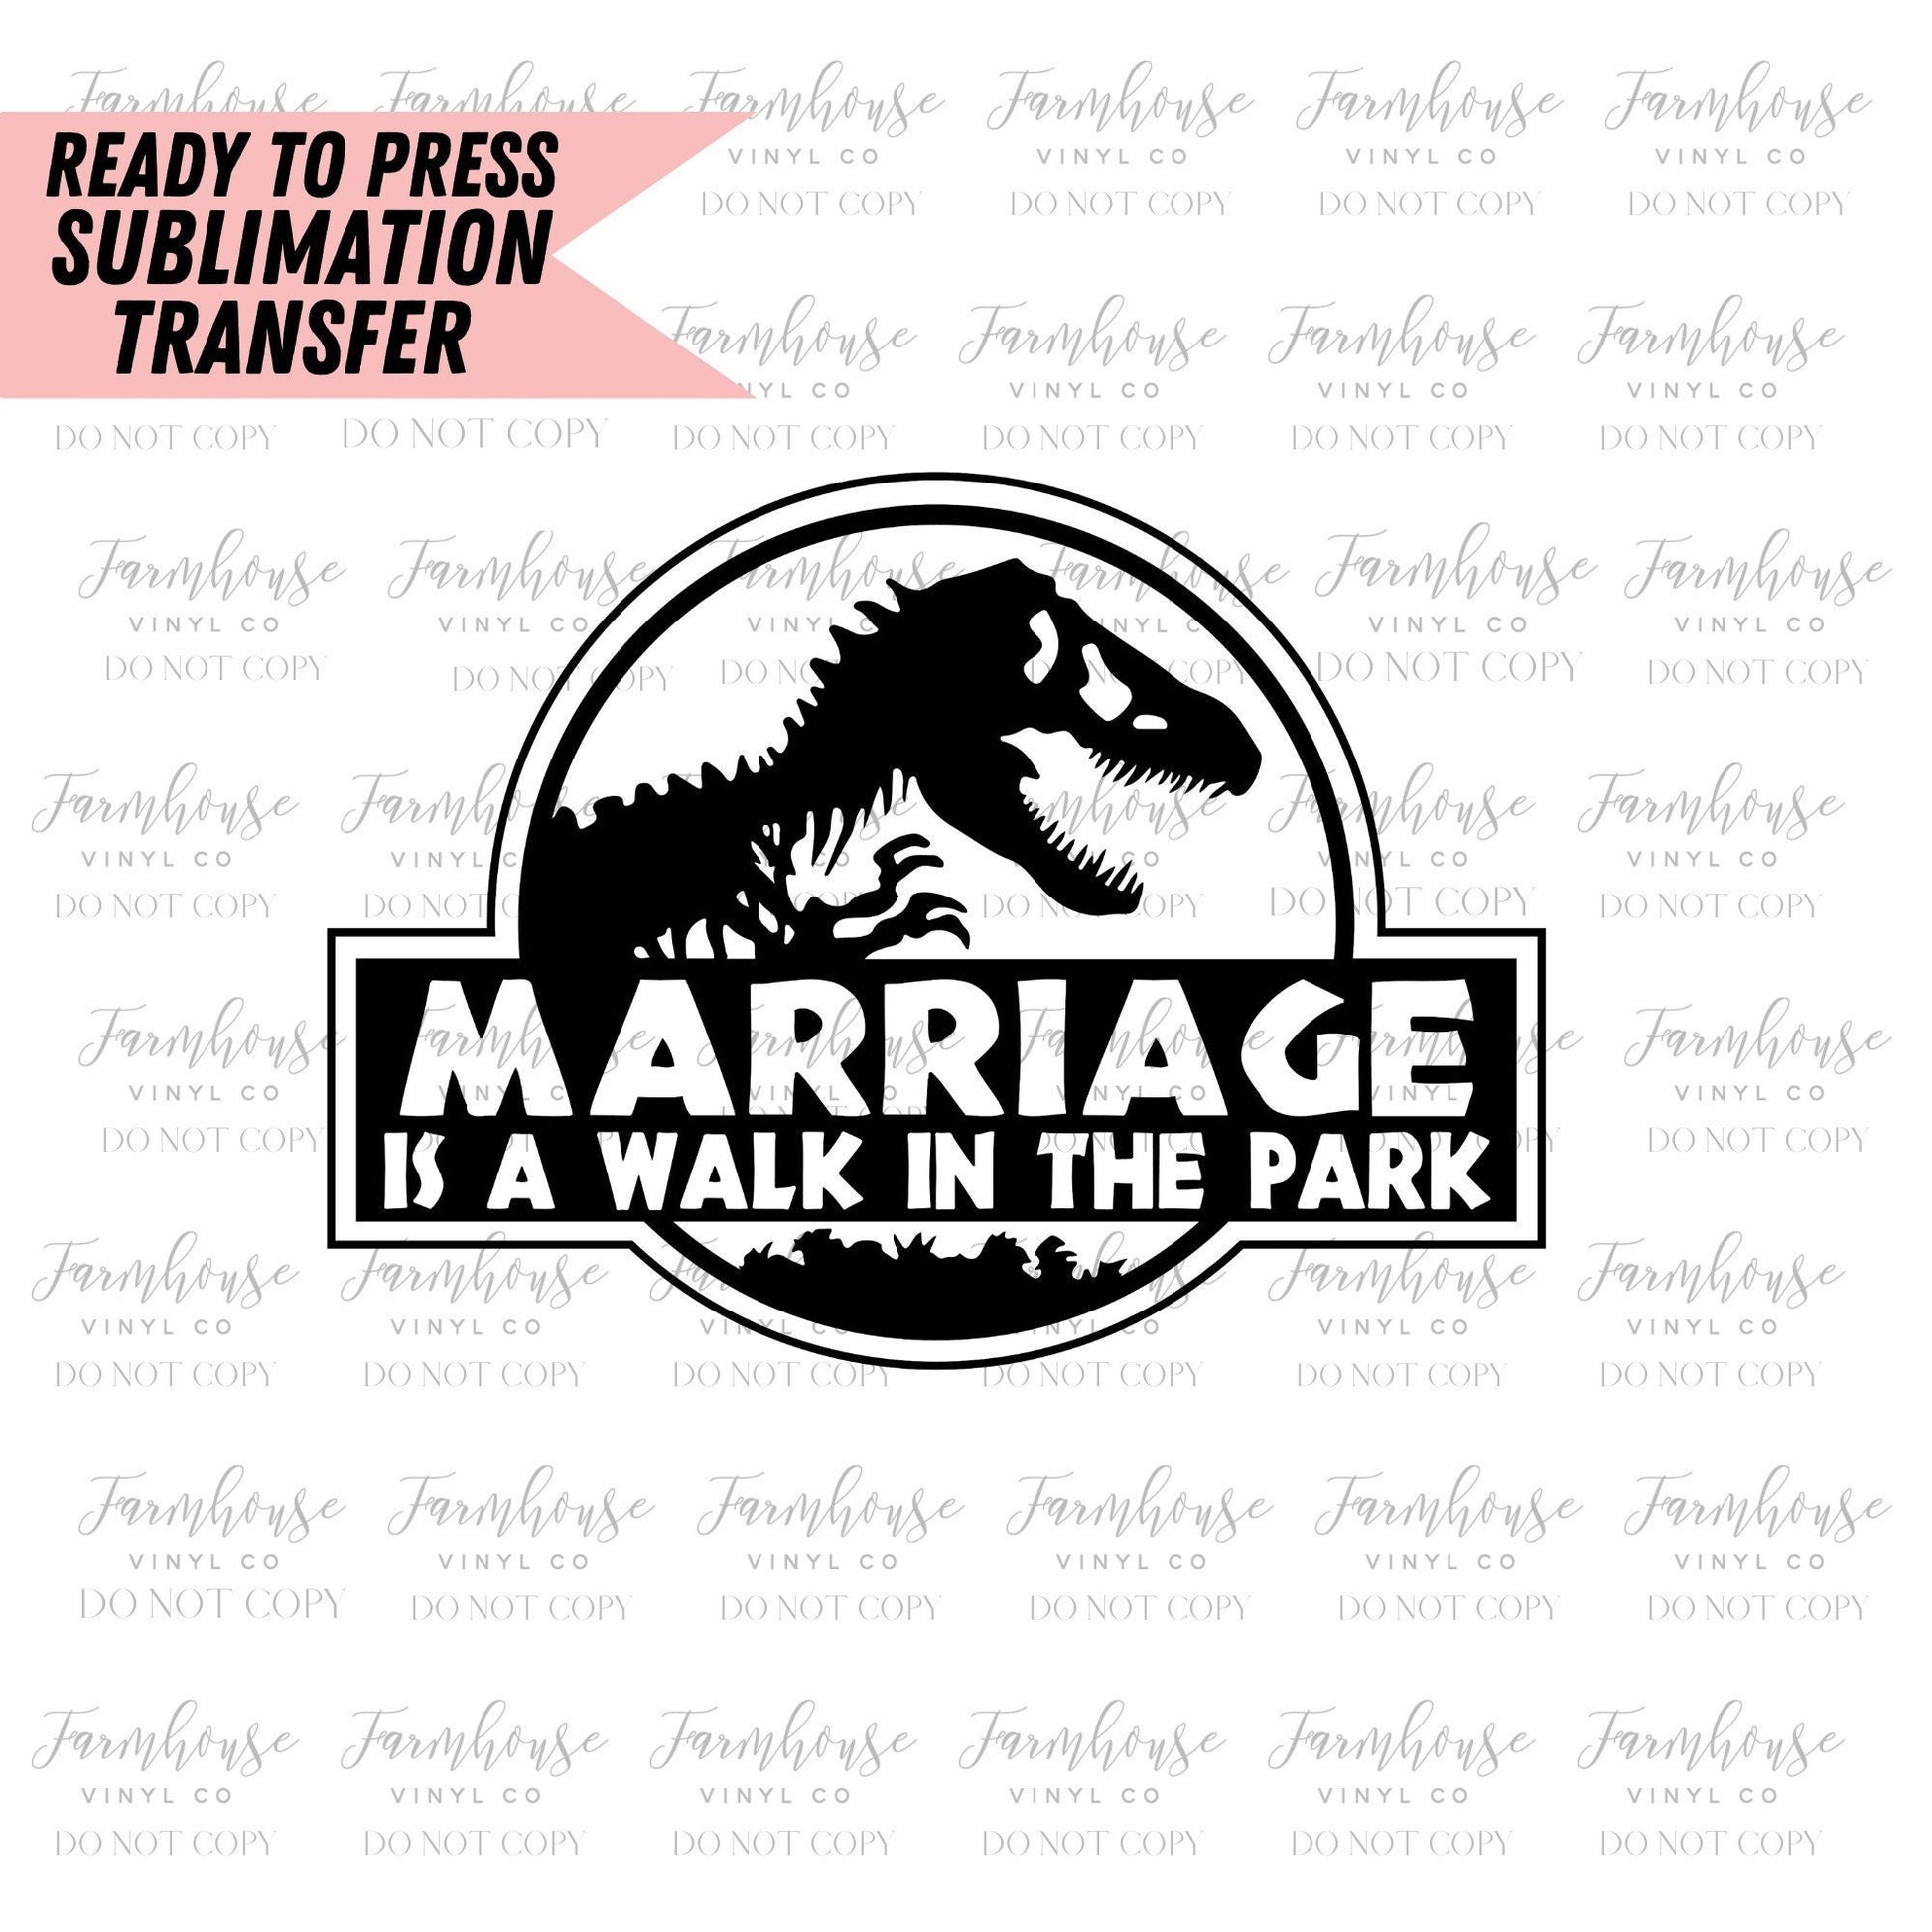 Marriage is Like A Walk in the Park Design / Ready to Press Sublimation Transfer / Sublimate Designs / Transfer Heat Design / Funny Design - Farmhouse Vinyl Co